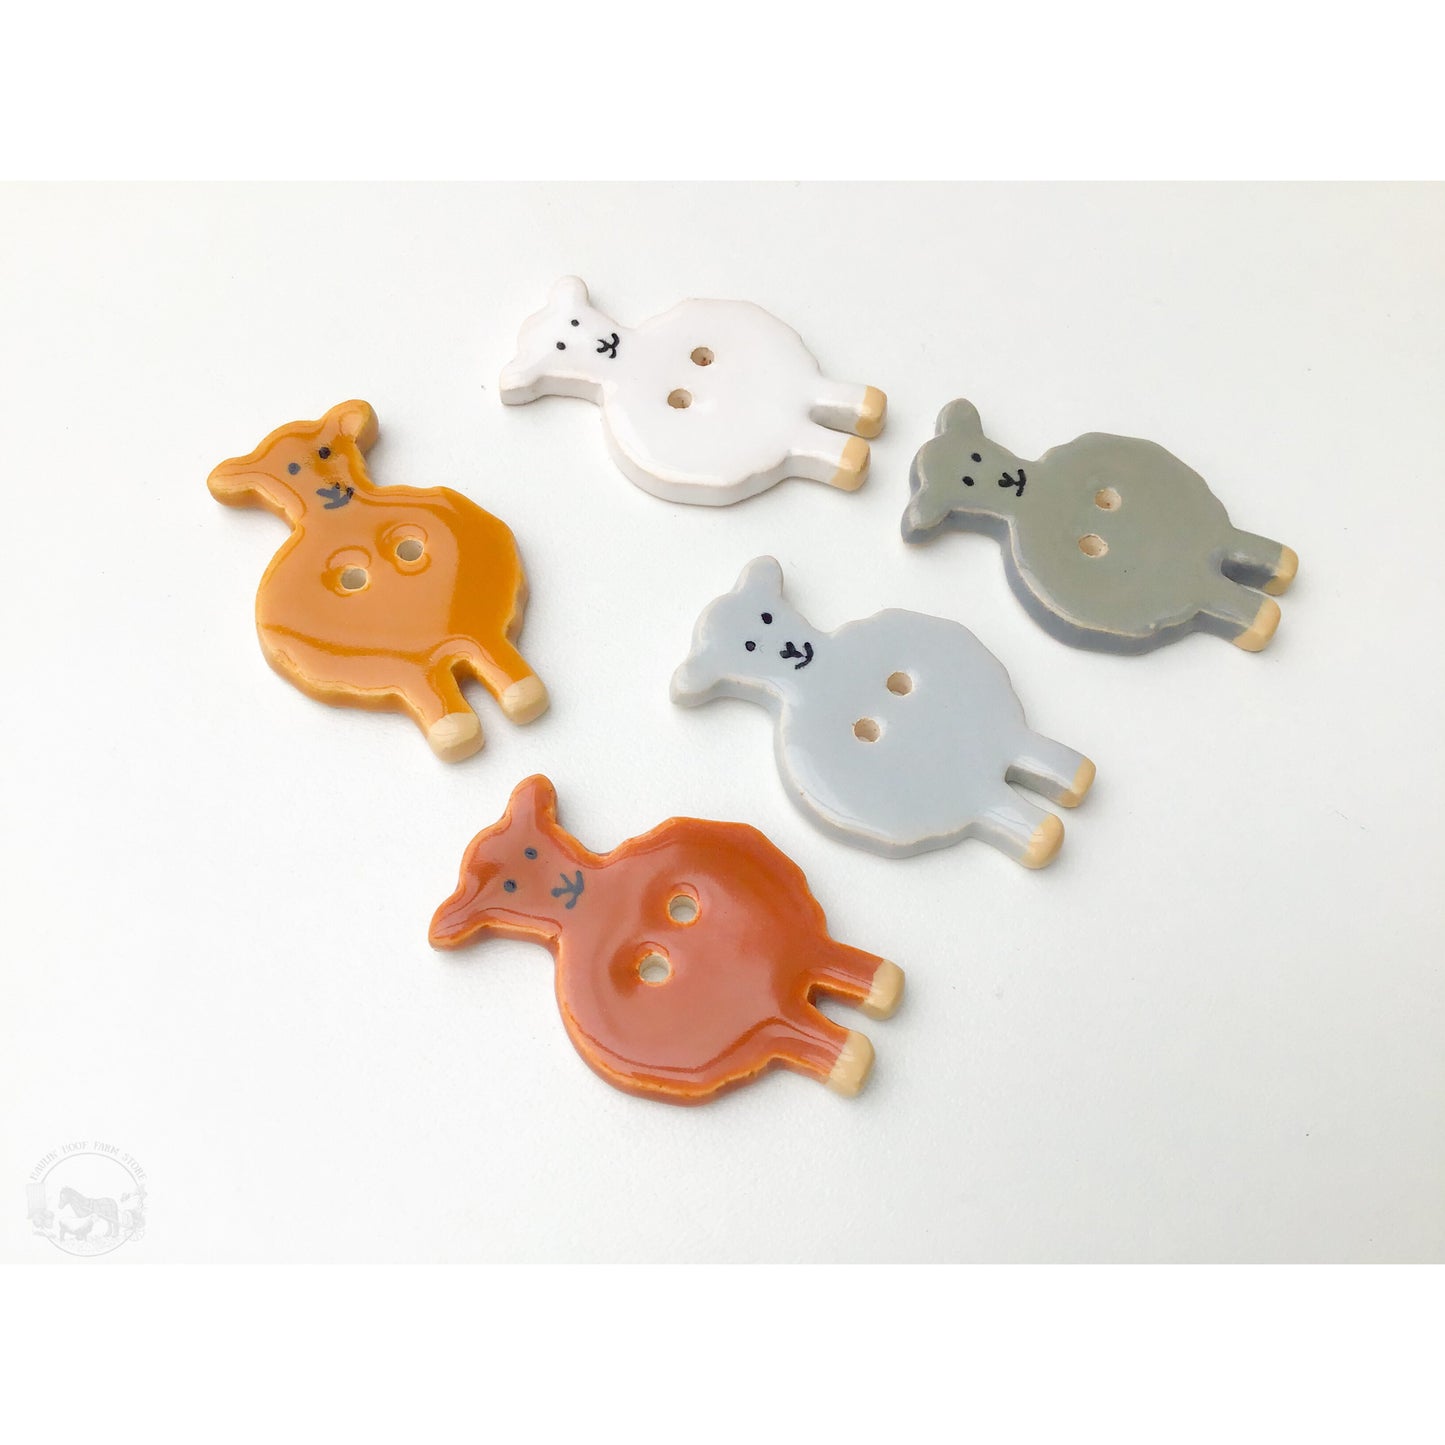 Wooly Friends Button Collection: Artisan Ceramic Sheep Buttons - Buttons for Sheep Lovers (ws-271)